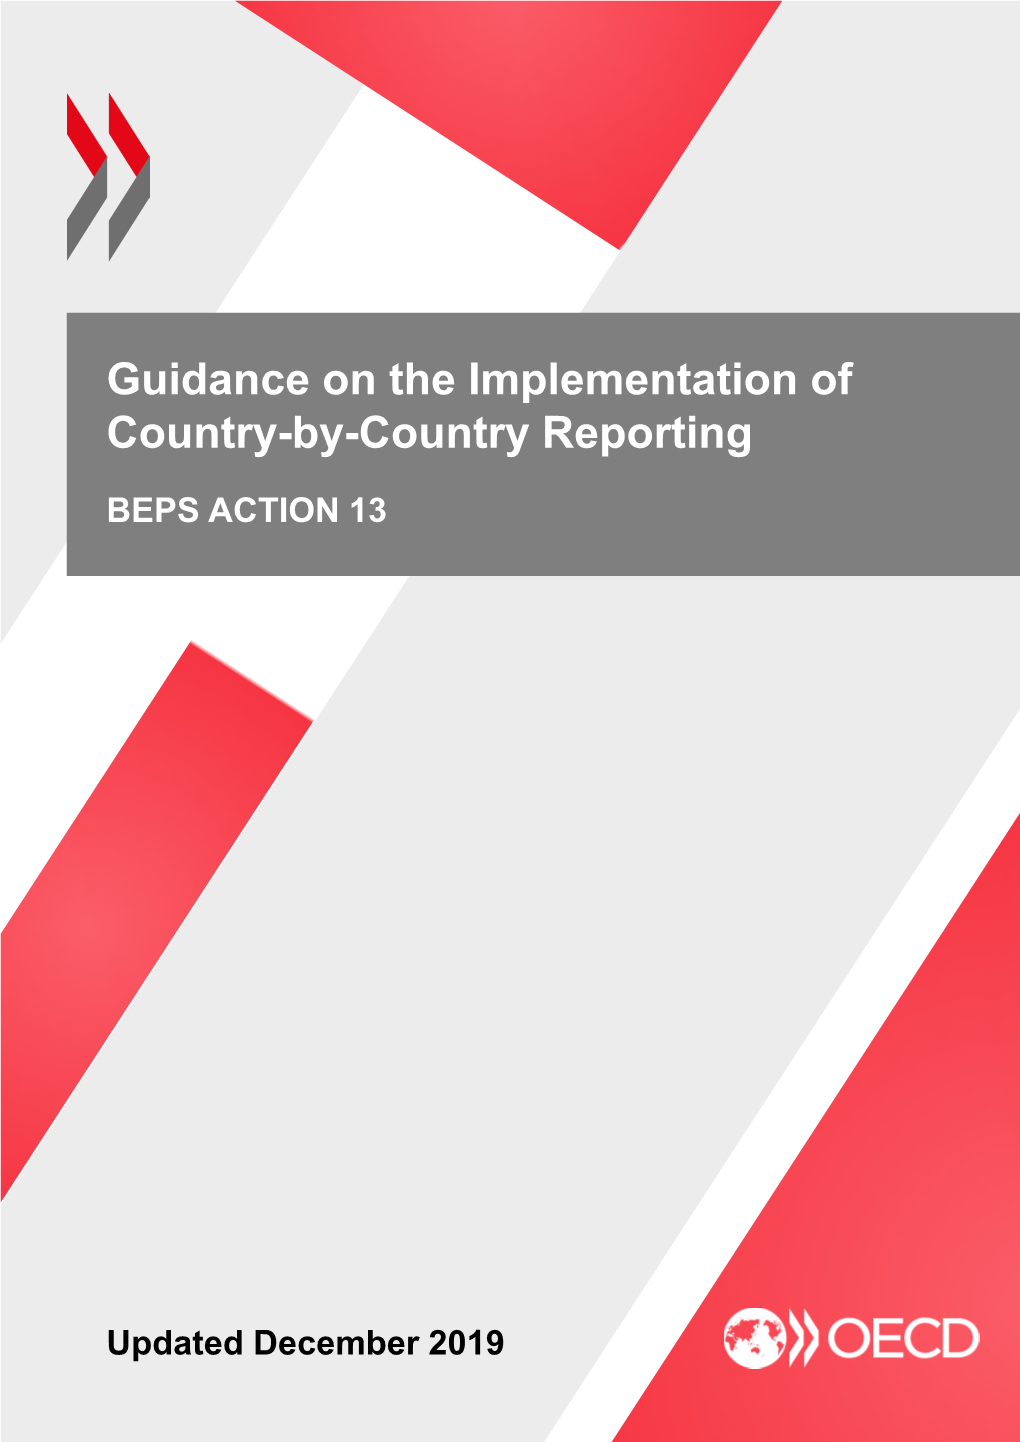 Guidance on the Implementation of Cbc Reporting